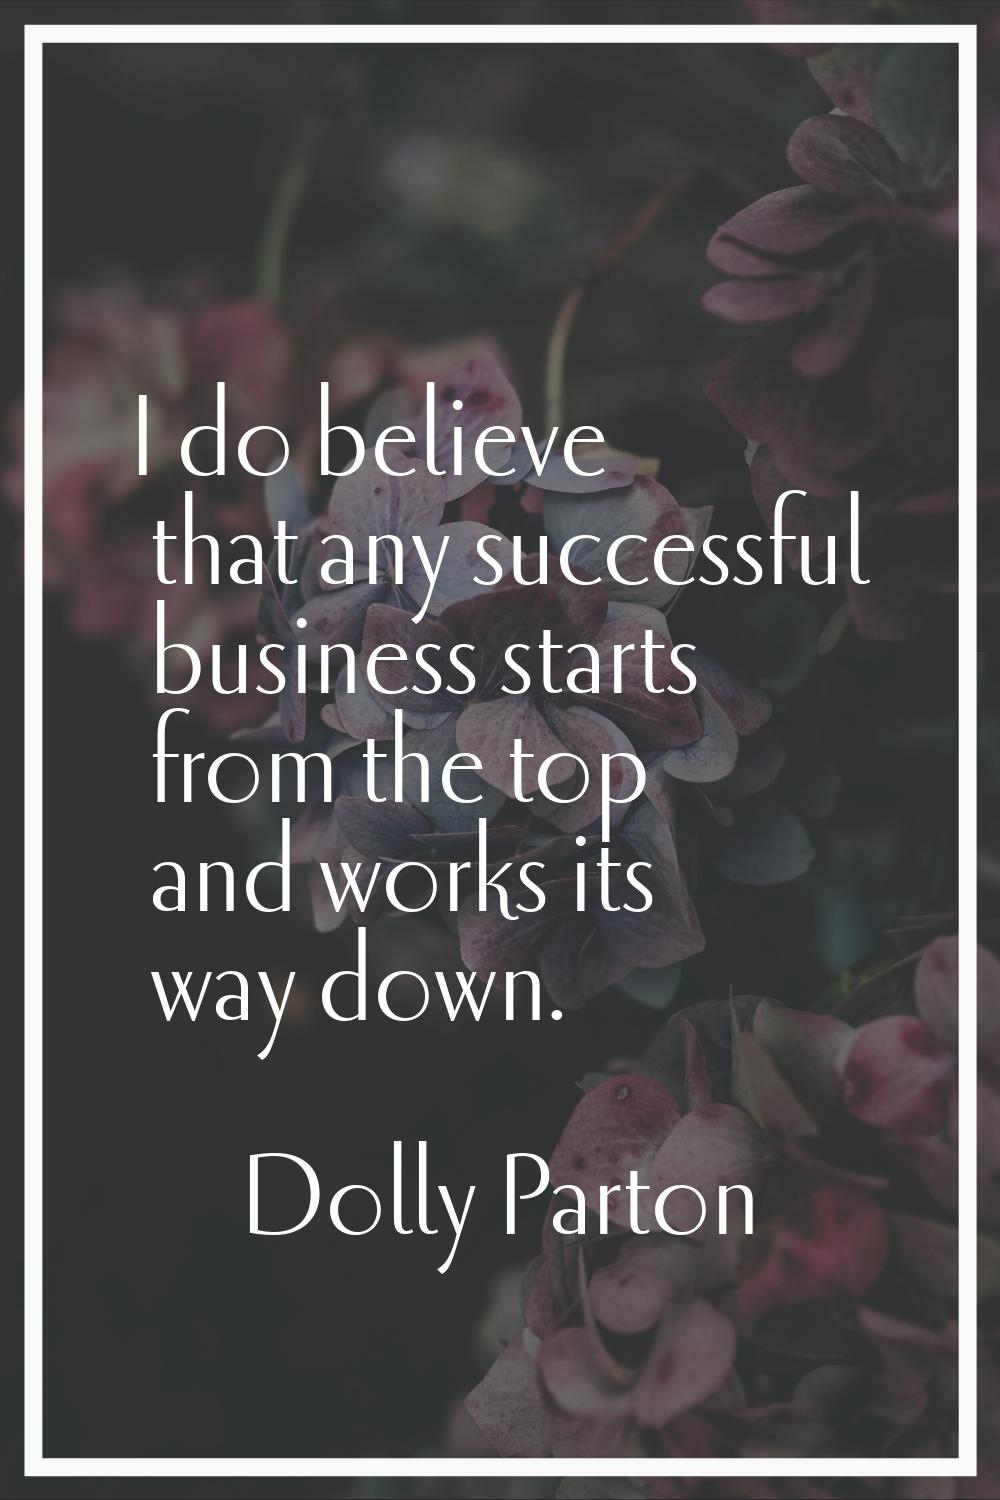 I do believe that any successful business starts from the top and works its way down.